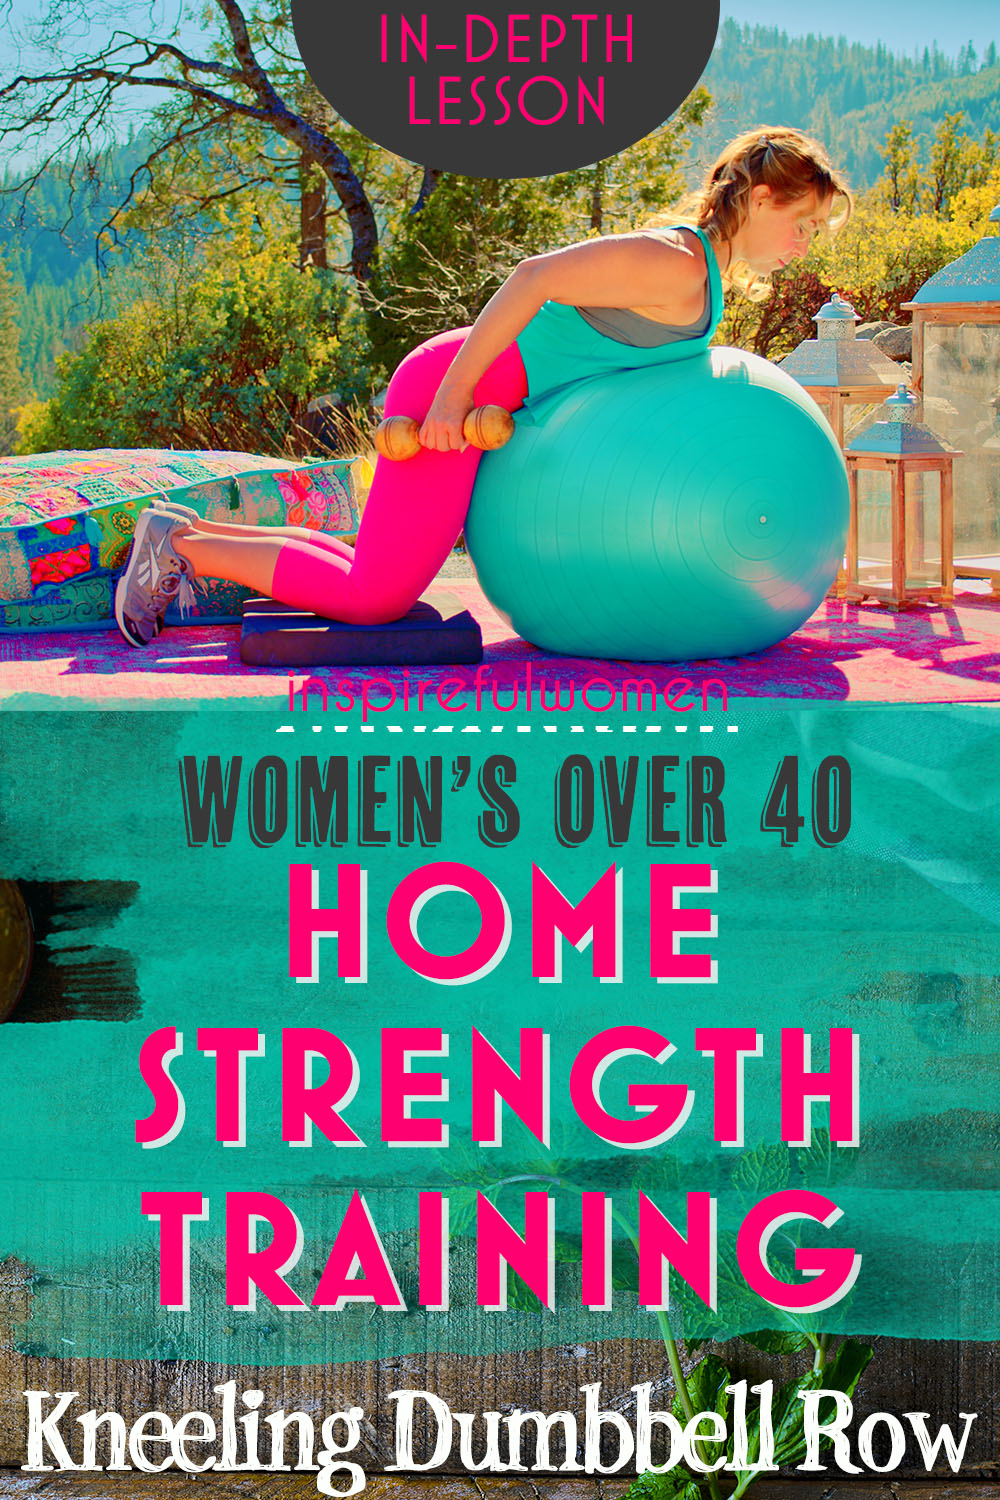 stability-ball-kneeling-dumbbell-row-lats-back-workout-at-home-for-women-40-plus